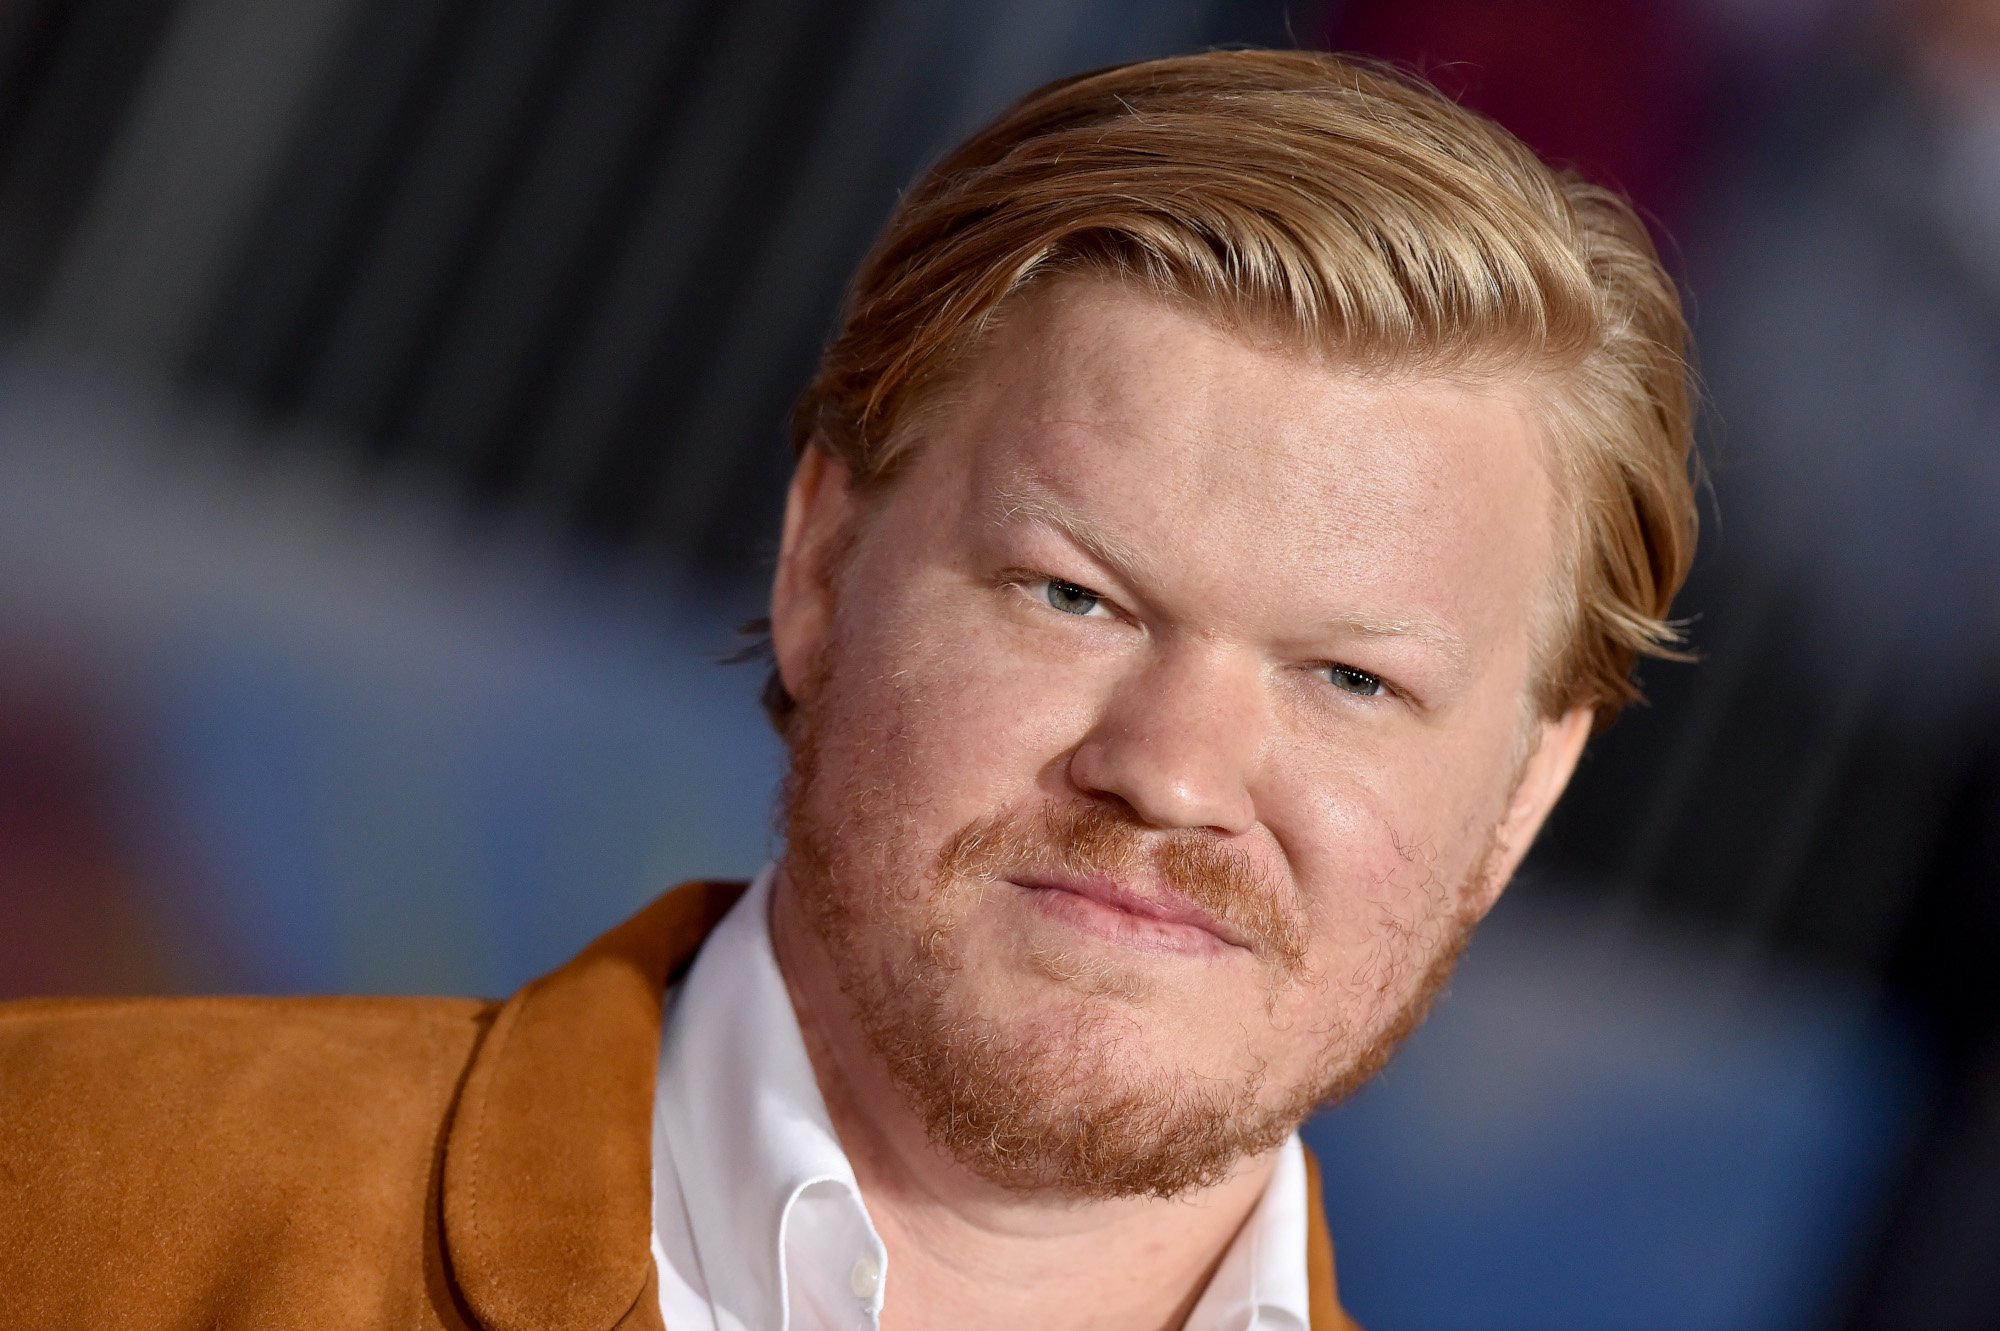 'Breaking Bad' actor Jesse Plemons at the premiere for 'El Camino.' He's wearing a white collared shirt and orange jacket, and his hair is slicked to the side.